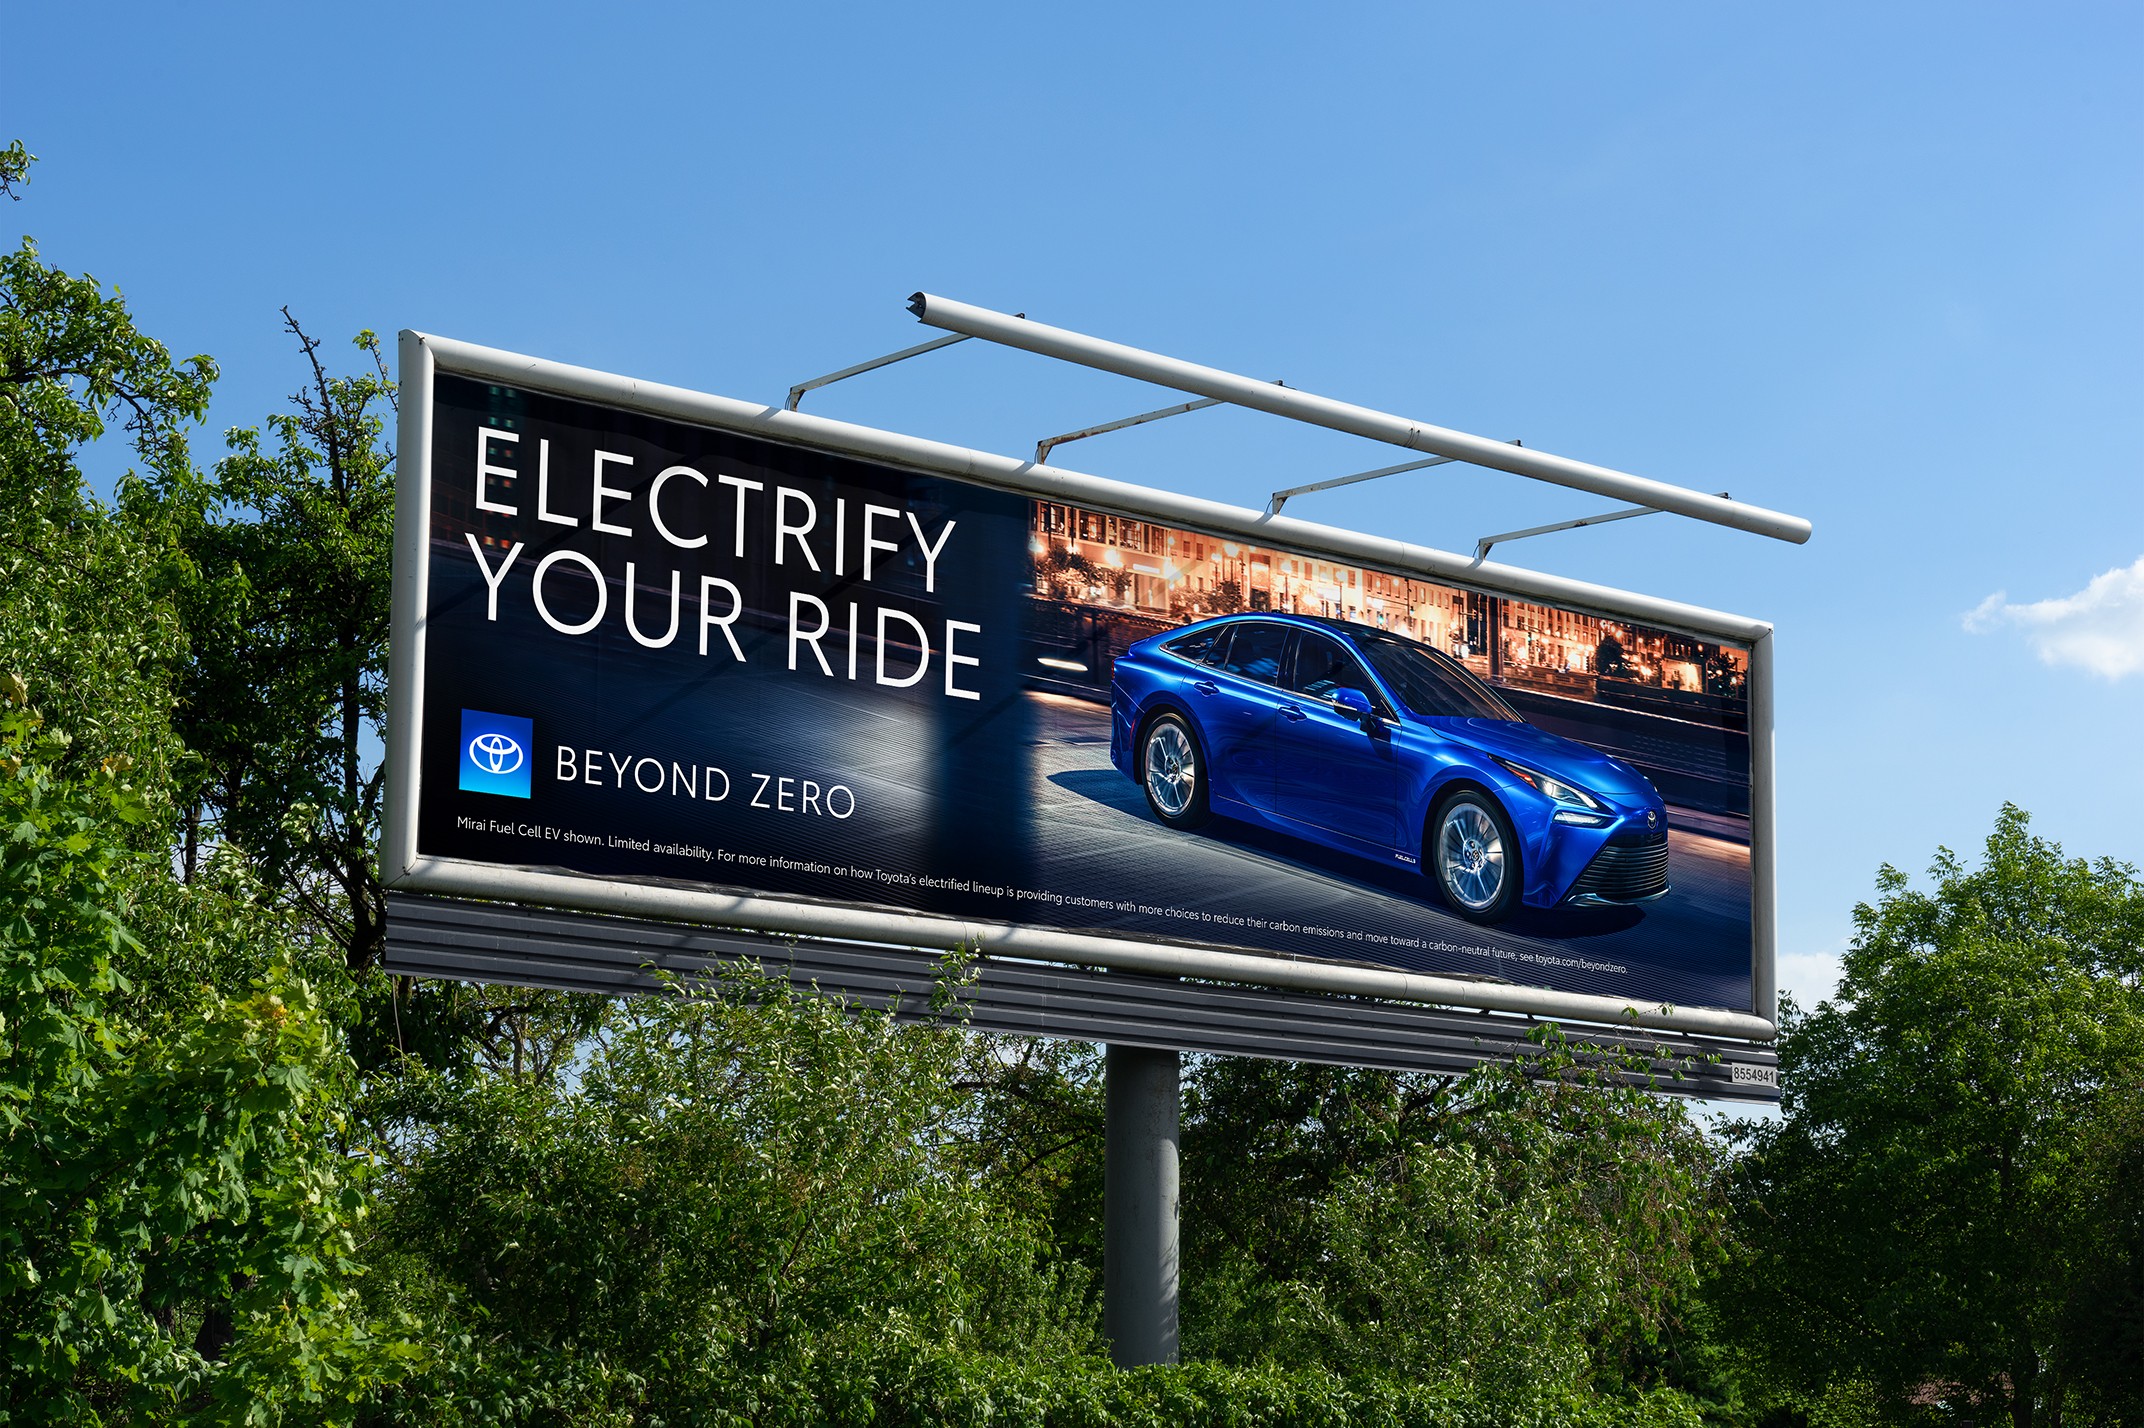 Toyota billboard with a Beyond Zero ad showing a blue Toyota electrified vehicle, the Beyond Zero logo and the headline “Electrify Your Ride.”